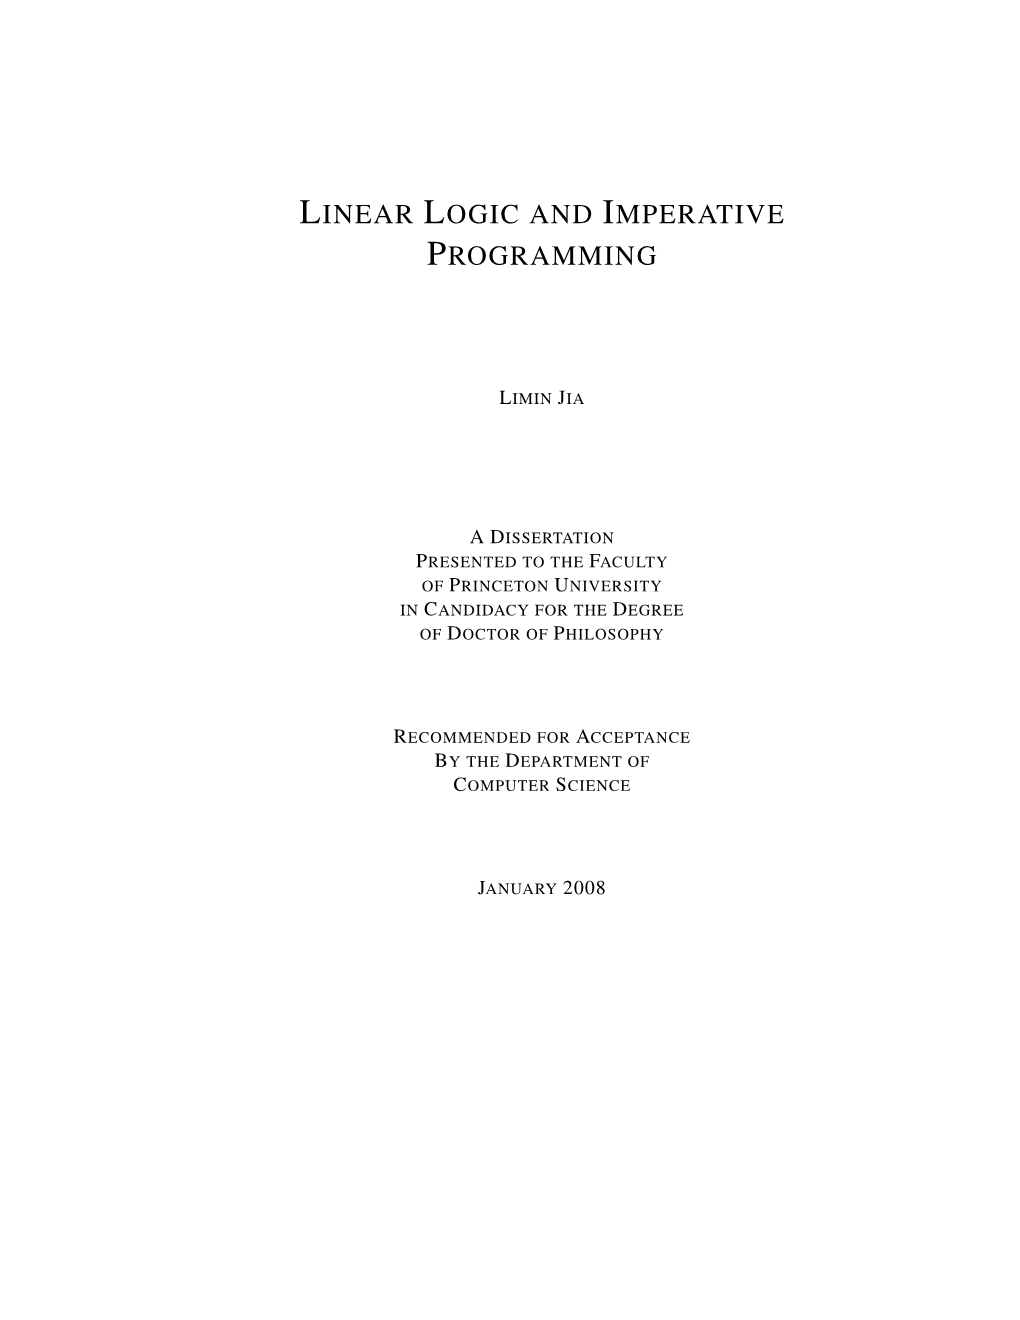 Linear Logic and Imperative Programming